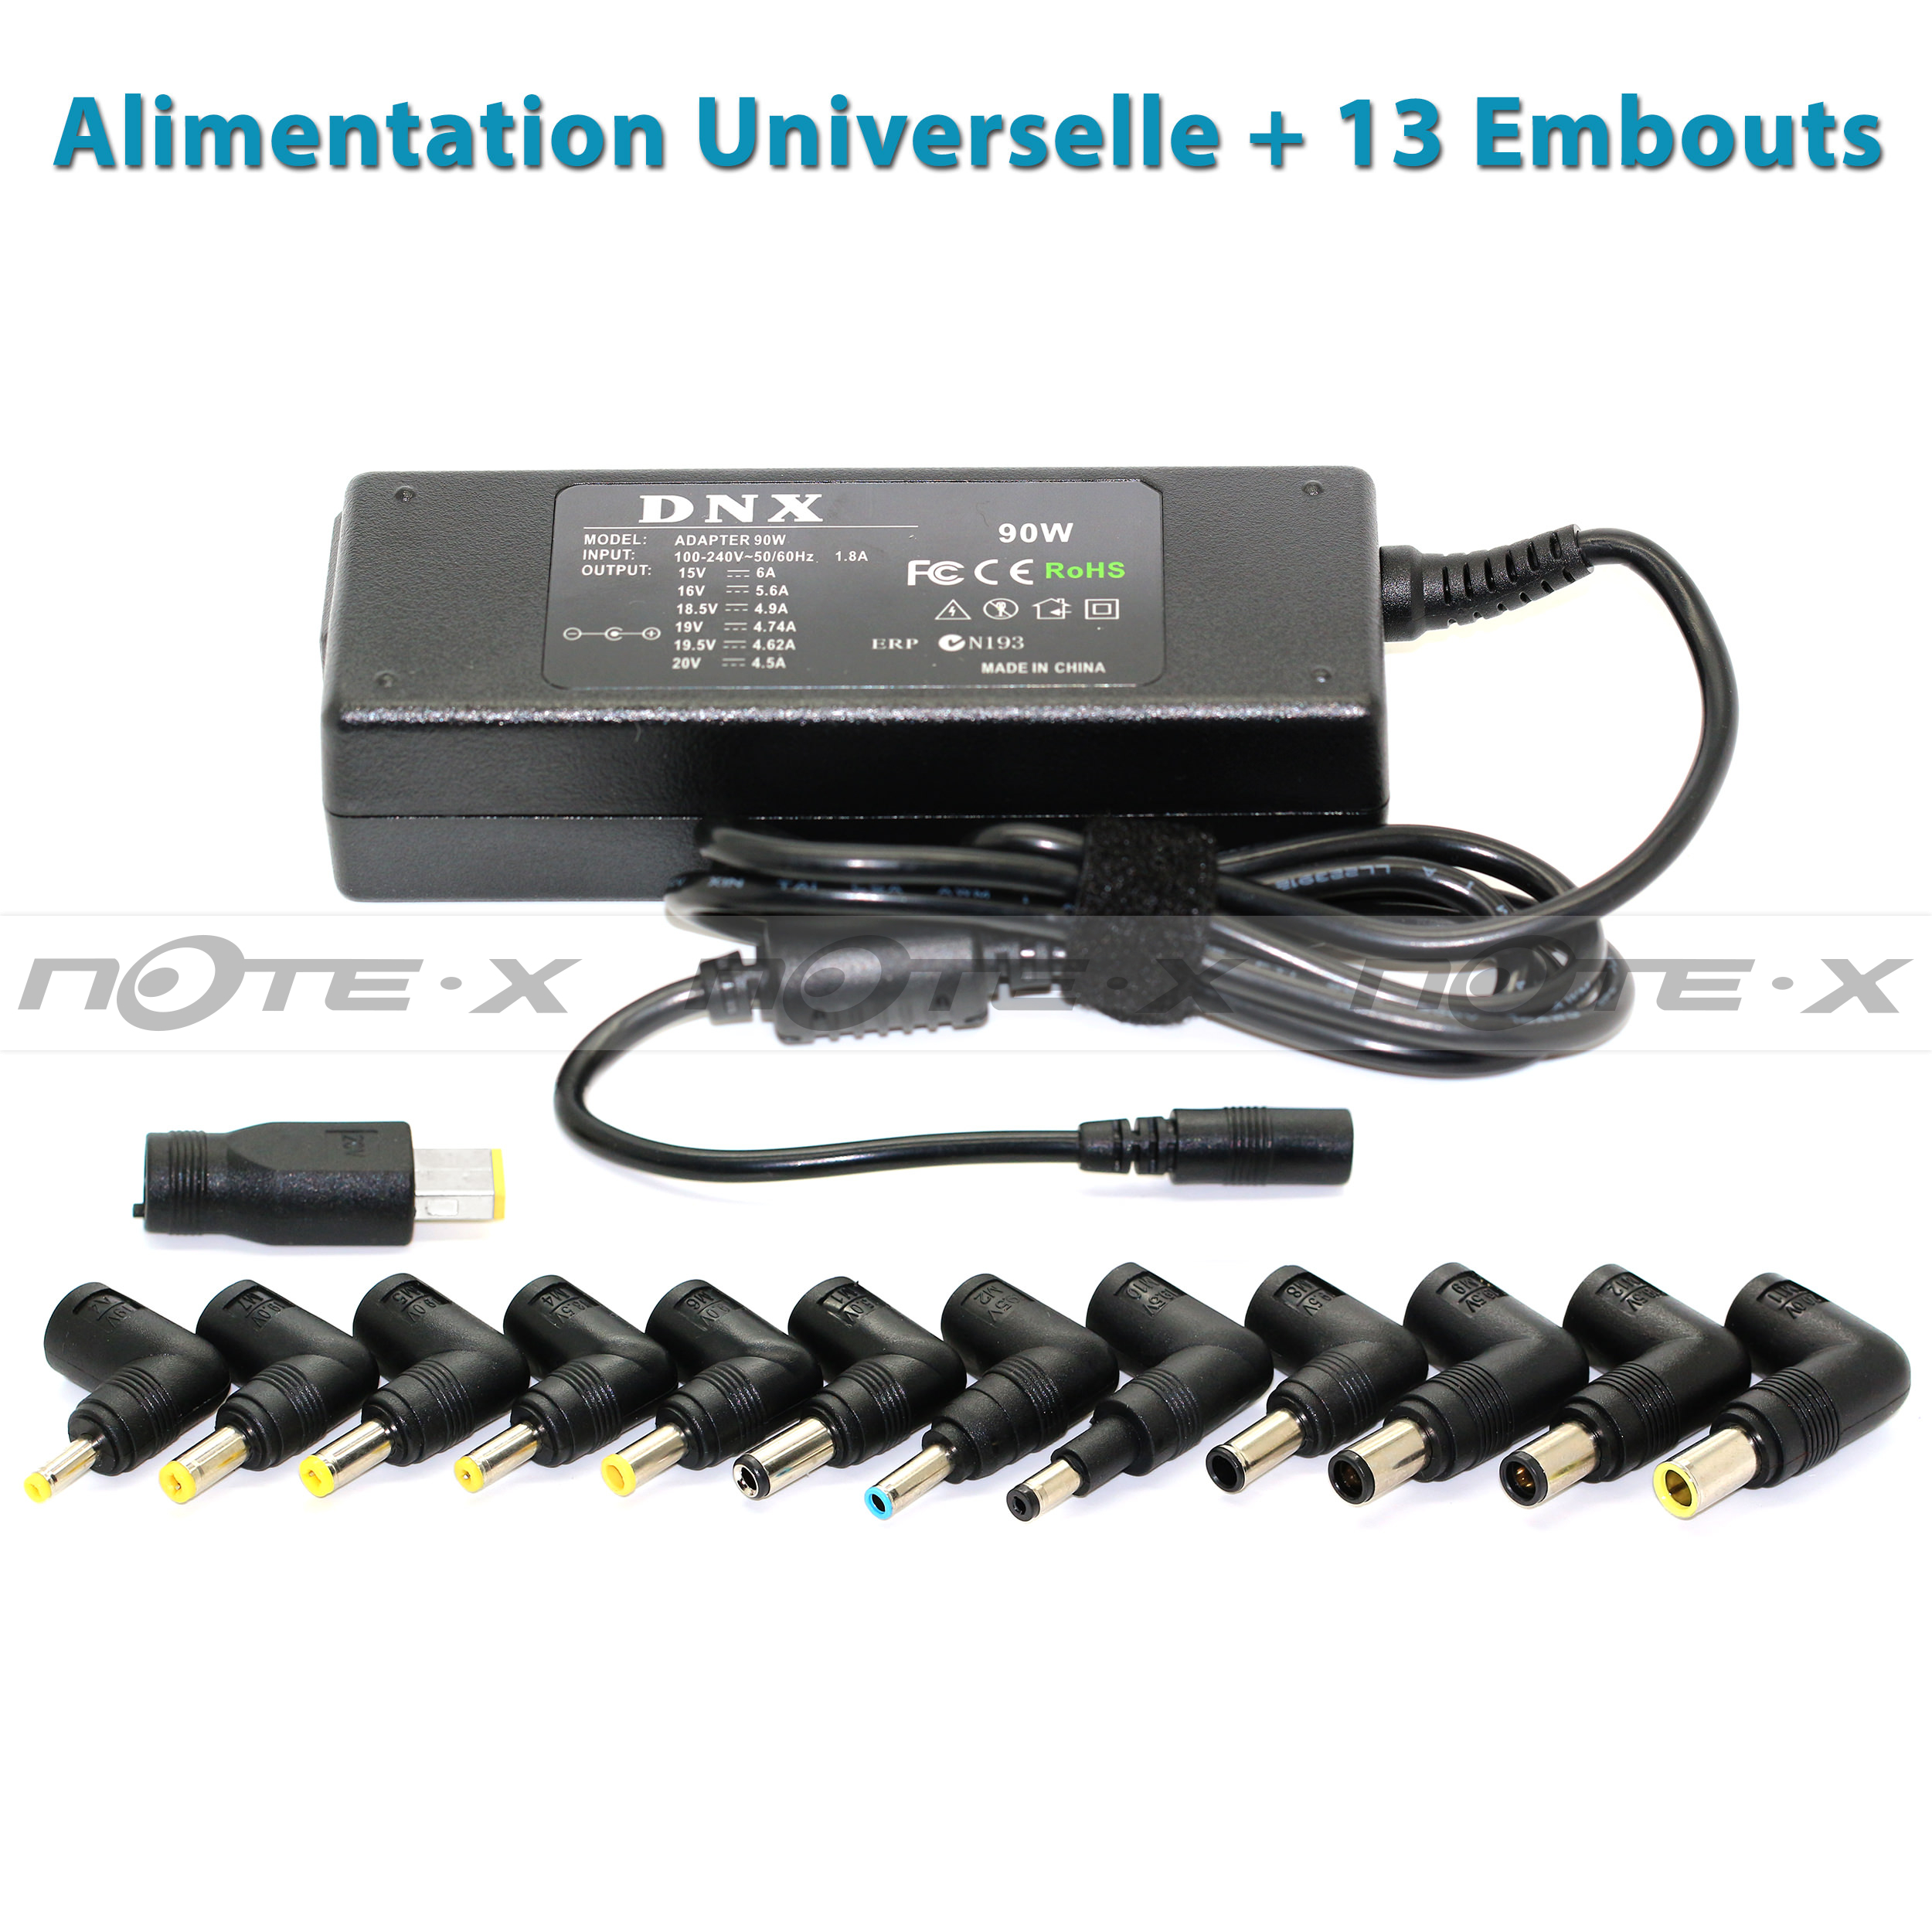 Chargeur universel 90W 18 embouts - infinytech-reunion